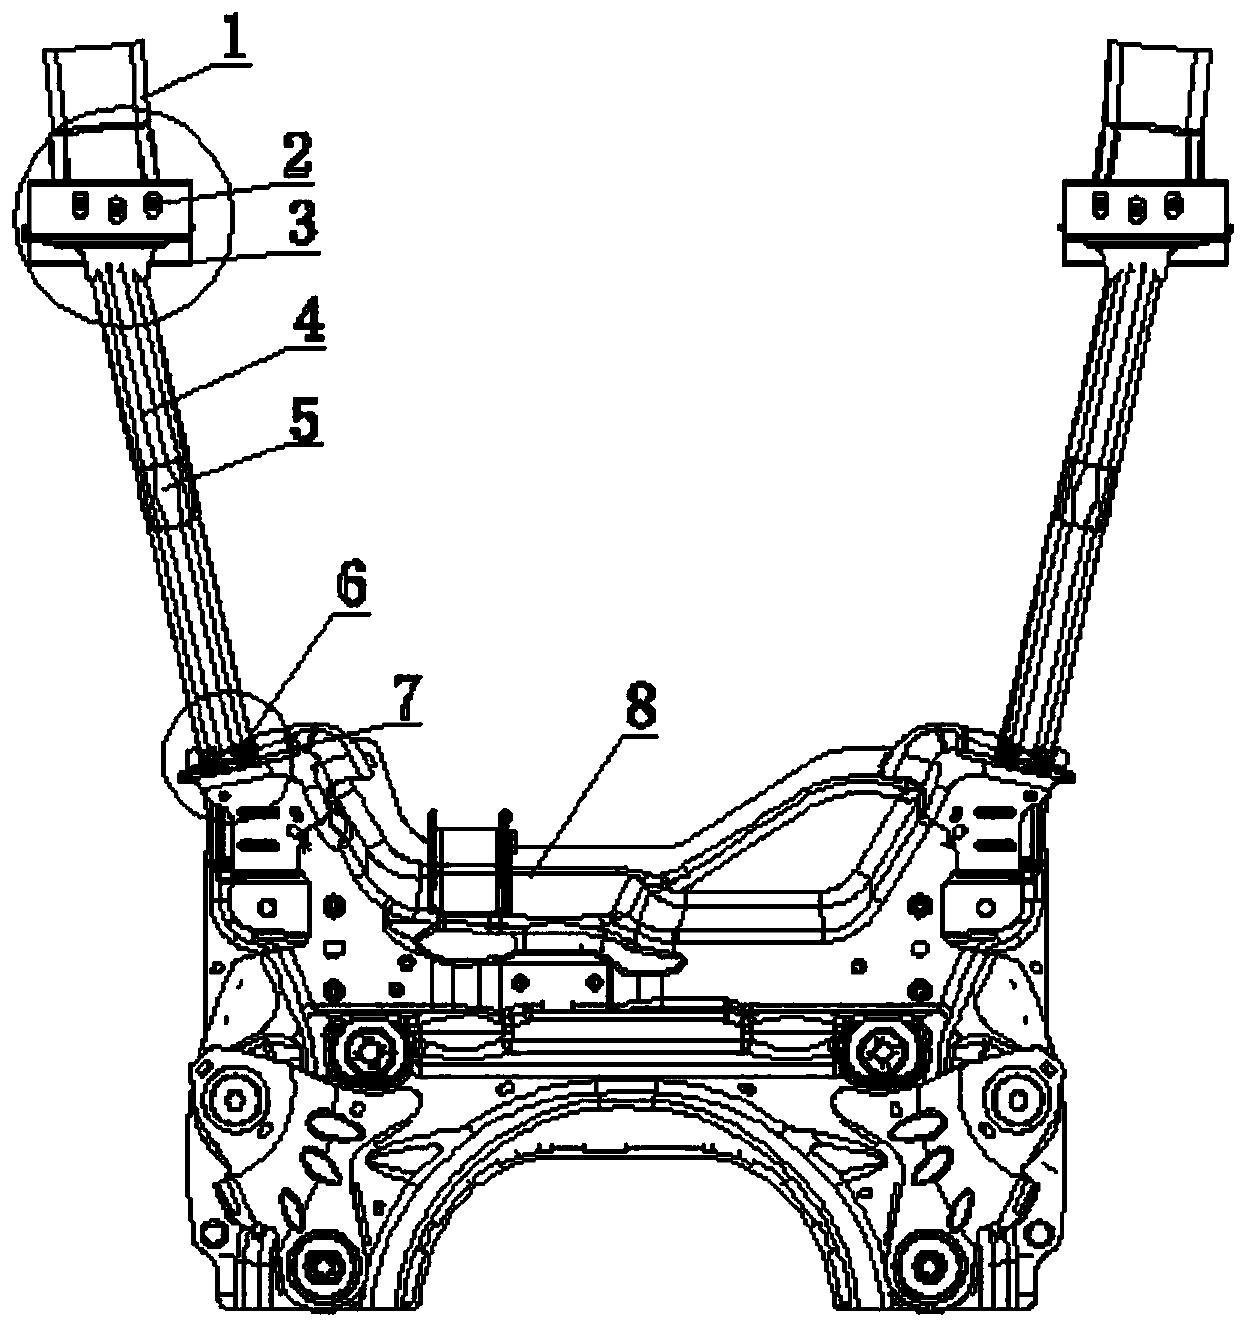 Novel chassis anti-collision structure